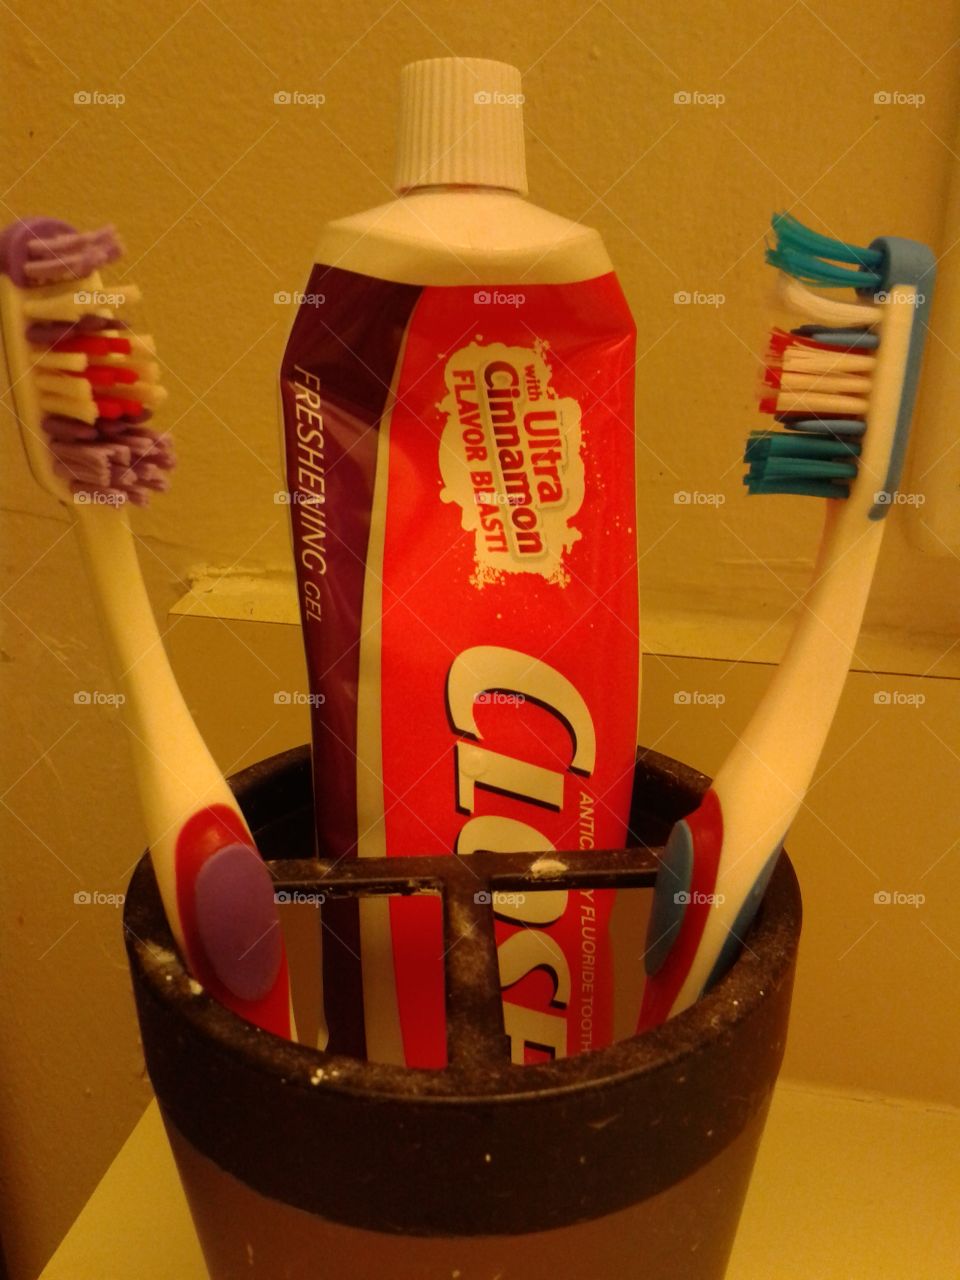 toothpaste & brushes. Toothpaste & toothbrushes cup